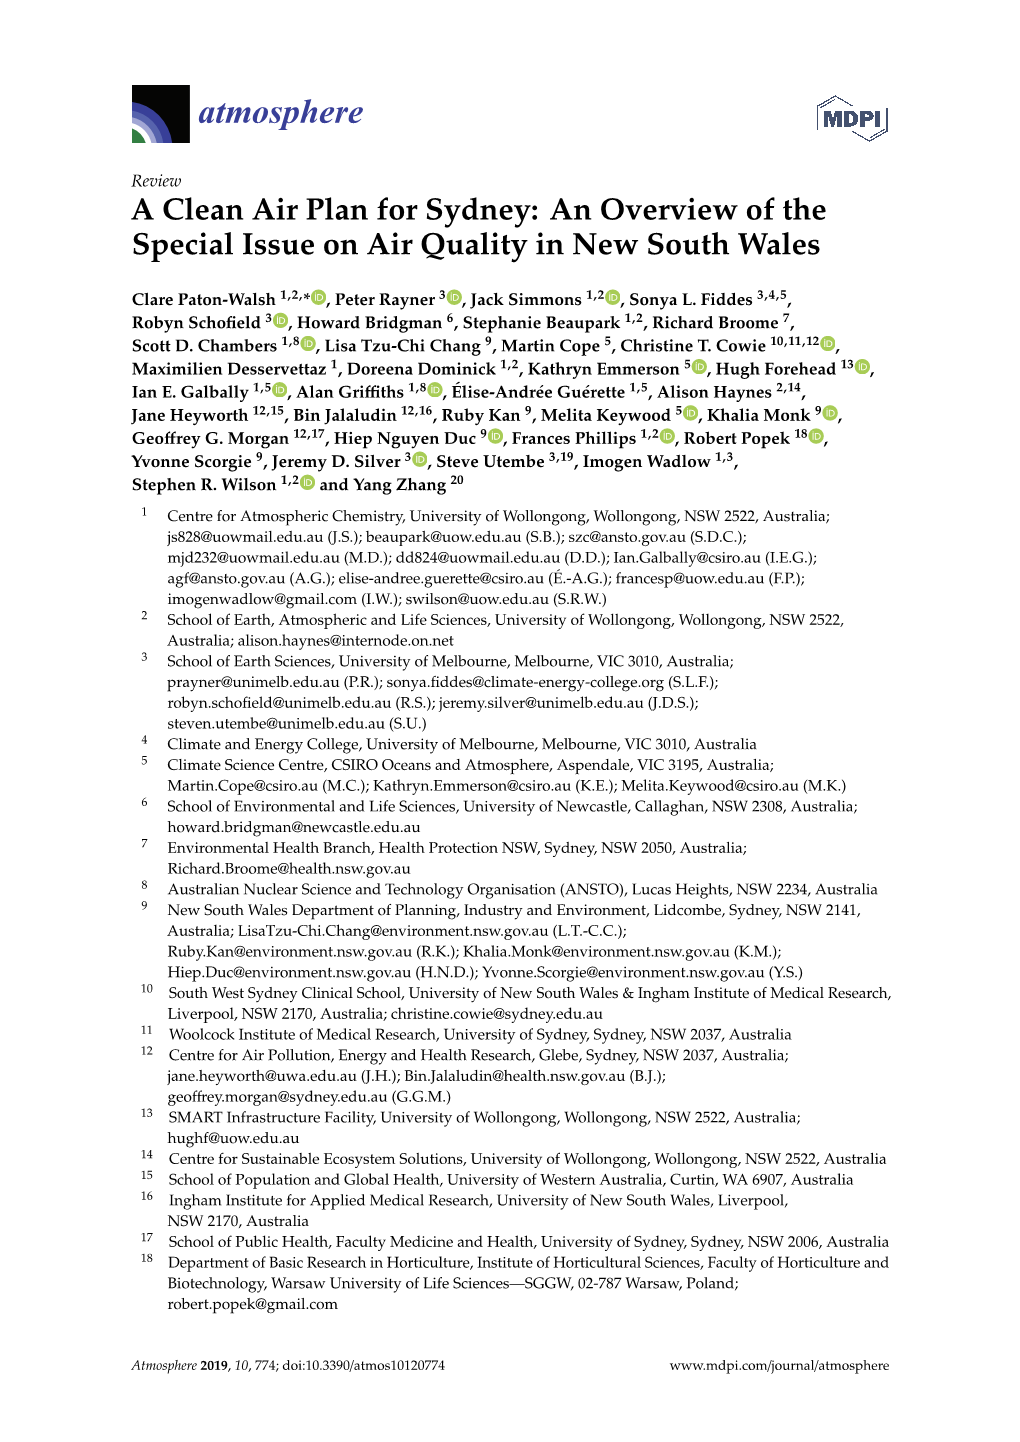 A Clean Air Plan for Sydney: an Overview of the Special Issue on Air Quality in New South Wales